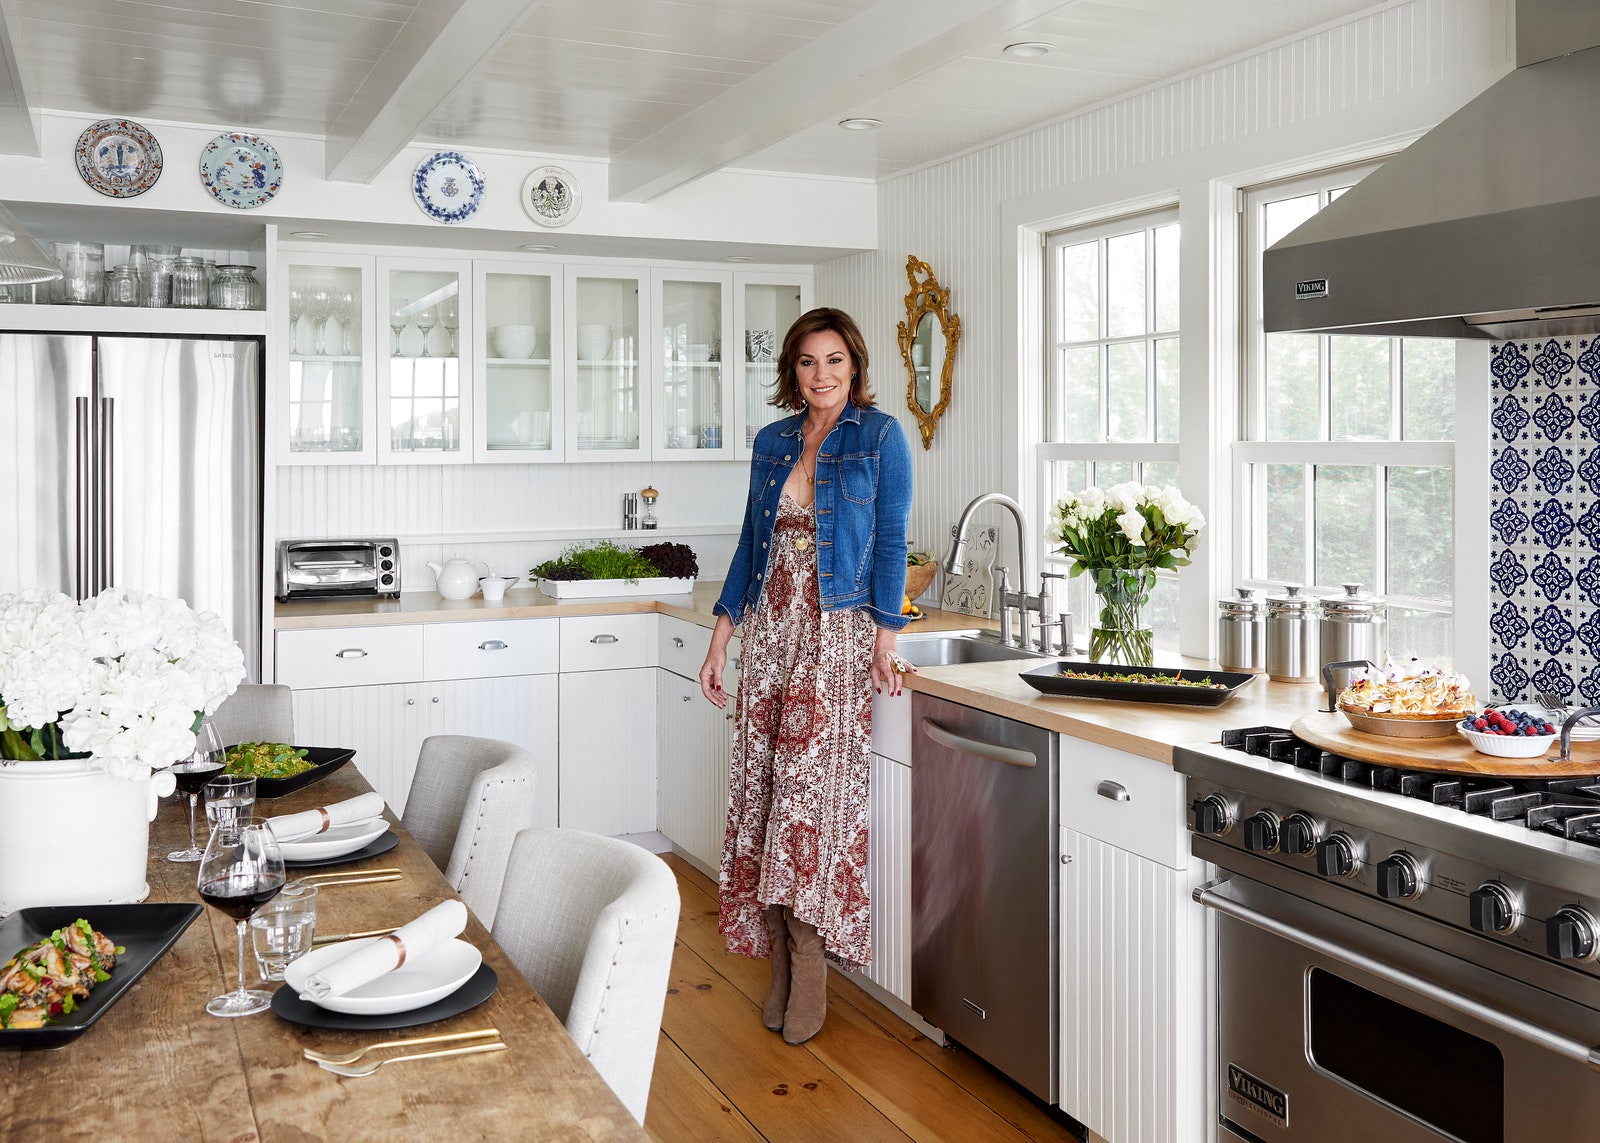 Luann de Lesseps of “The Real Housewives of New York” in whitewalled kitchen with blue patterned backsplash and glass...